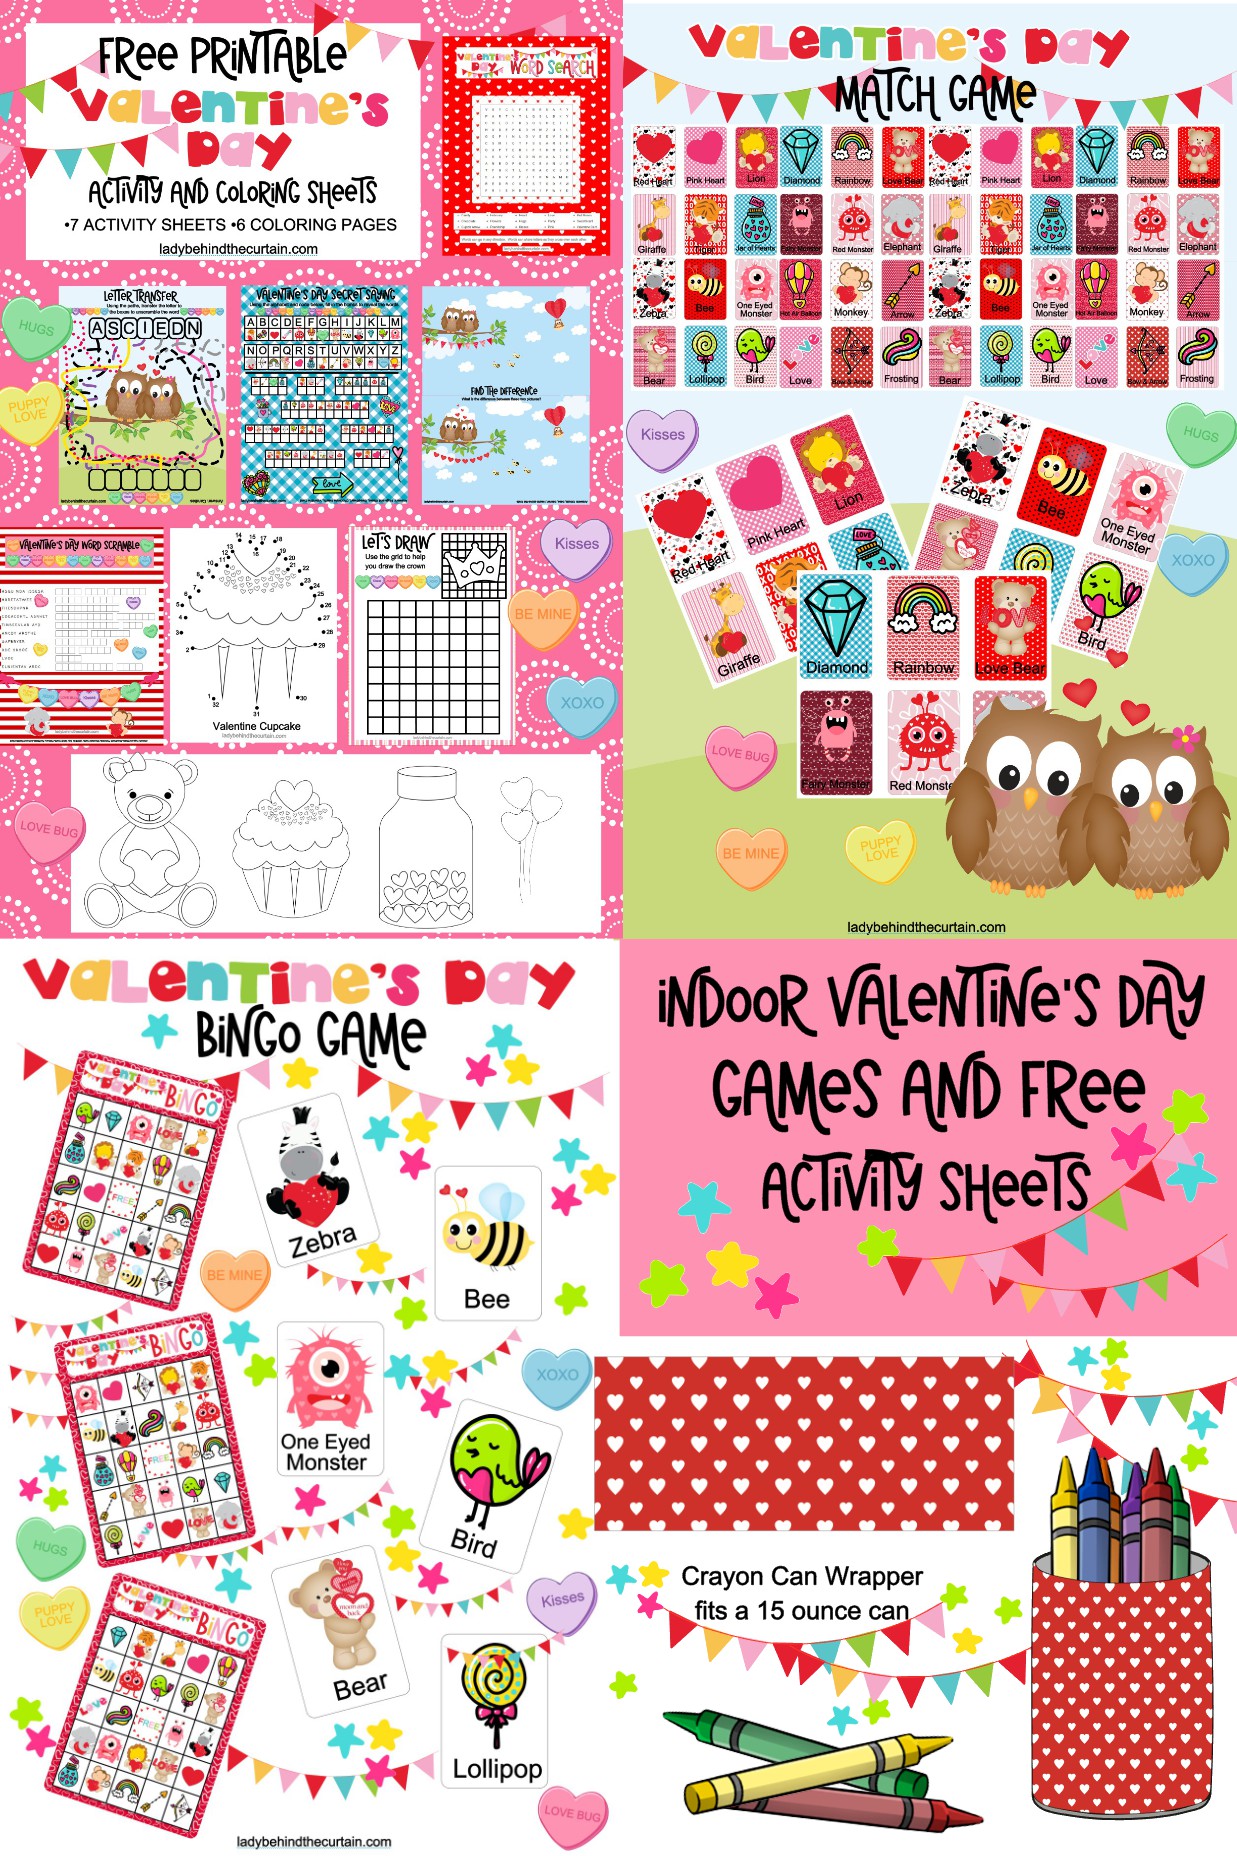 Indoor Valentine's Day Games and Free Activity Sheets